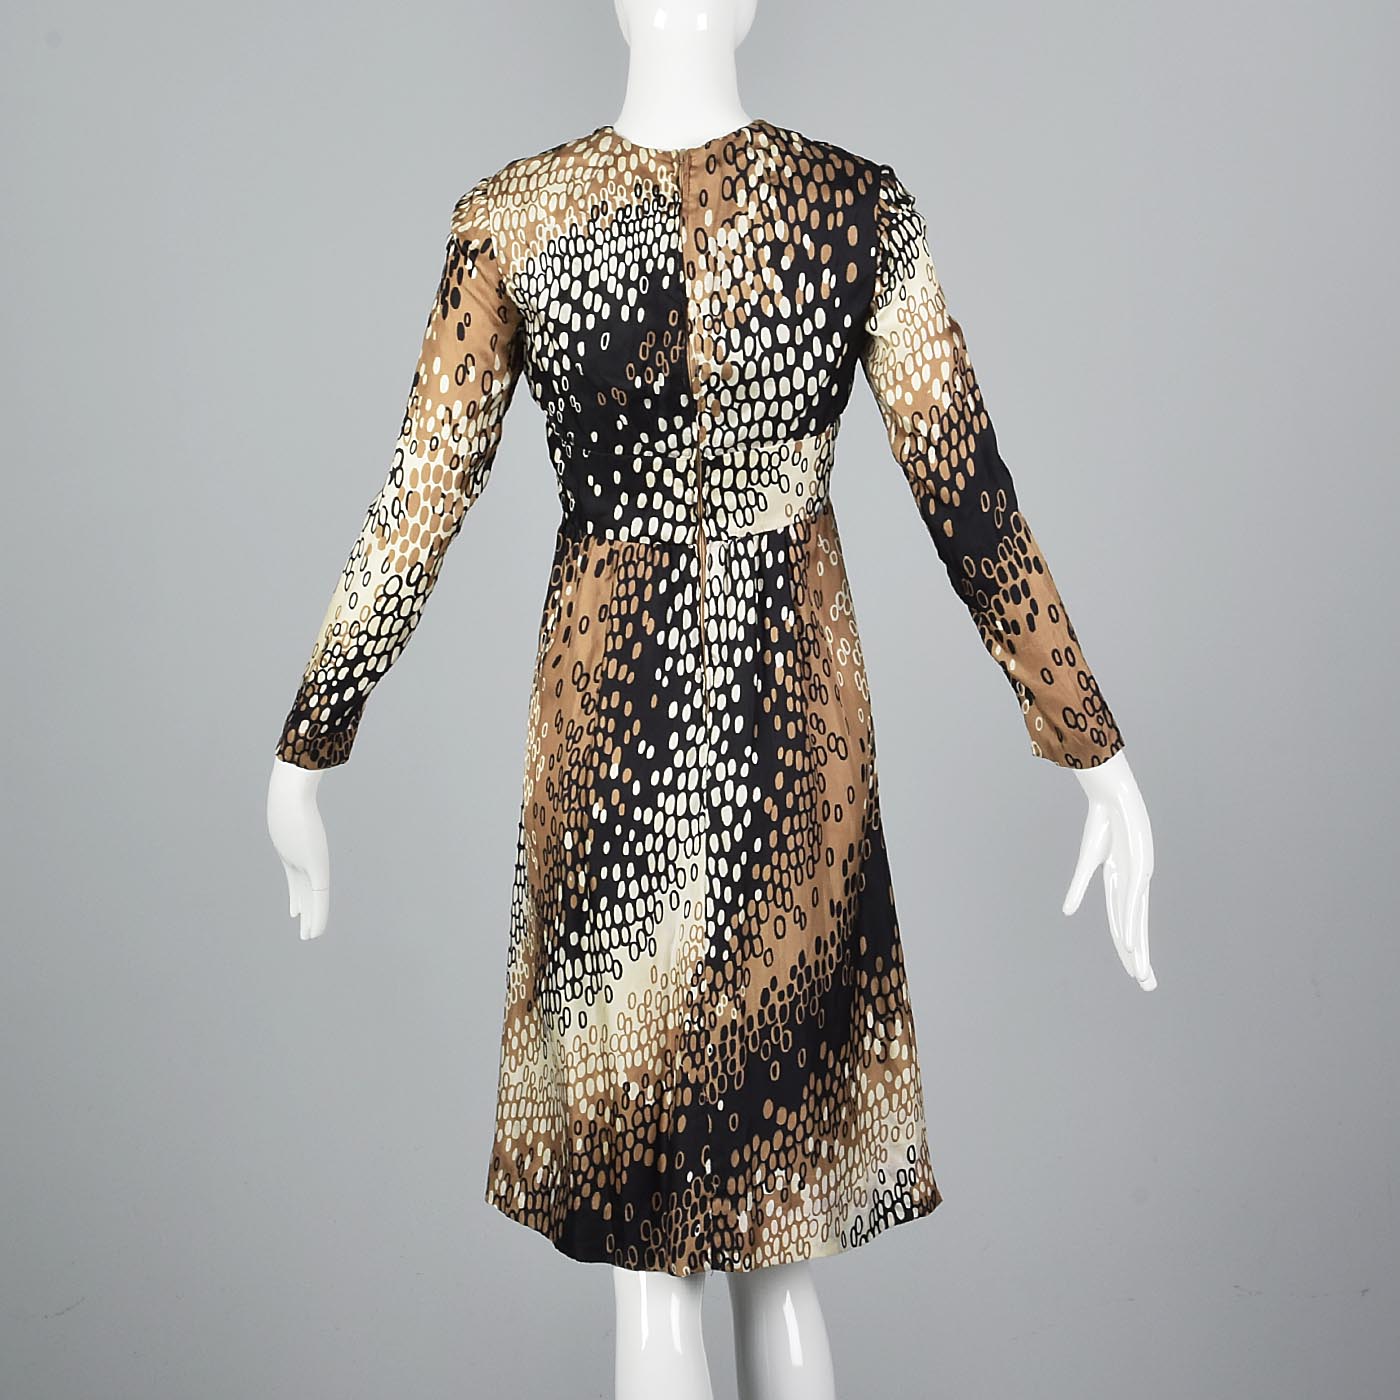 1960s Silk Dress with White, Tan, and Black Op Art Print